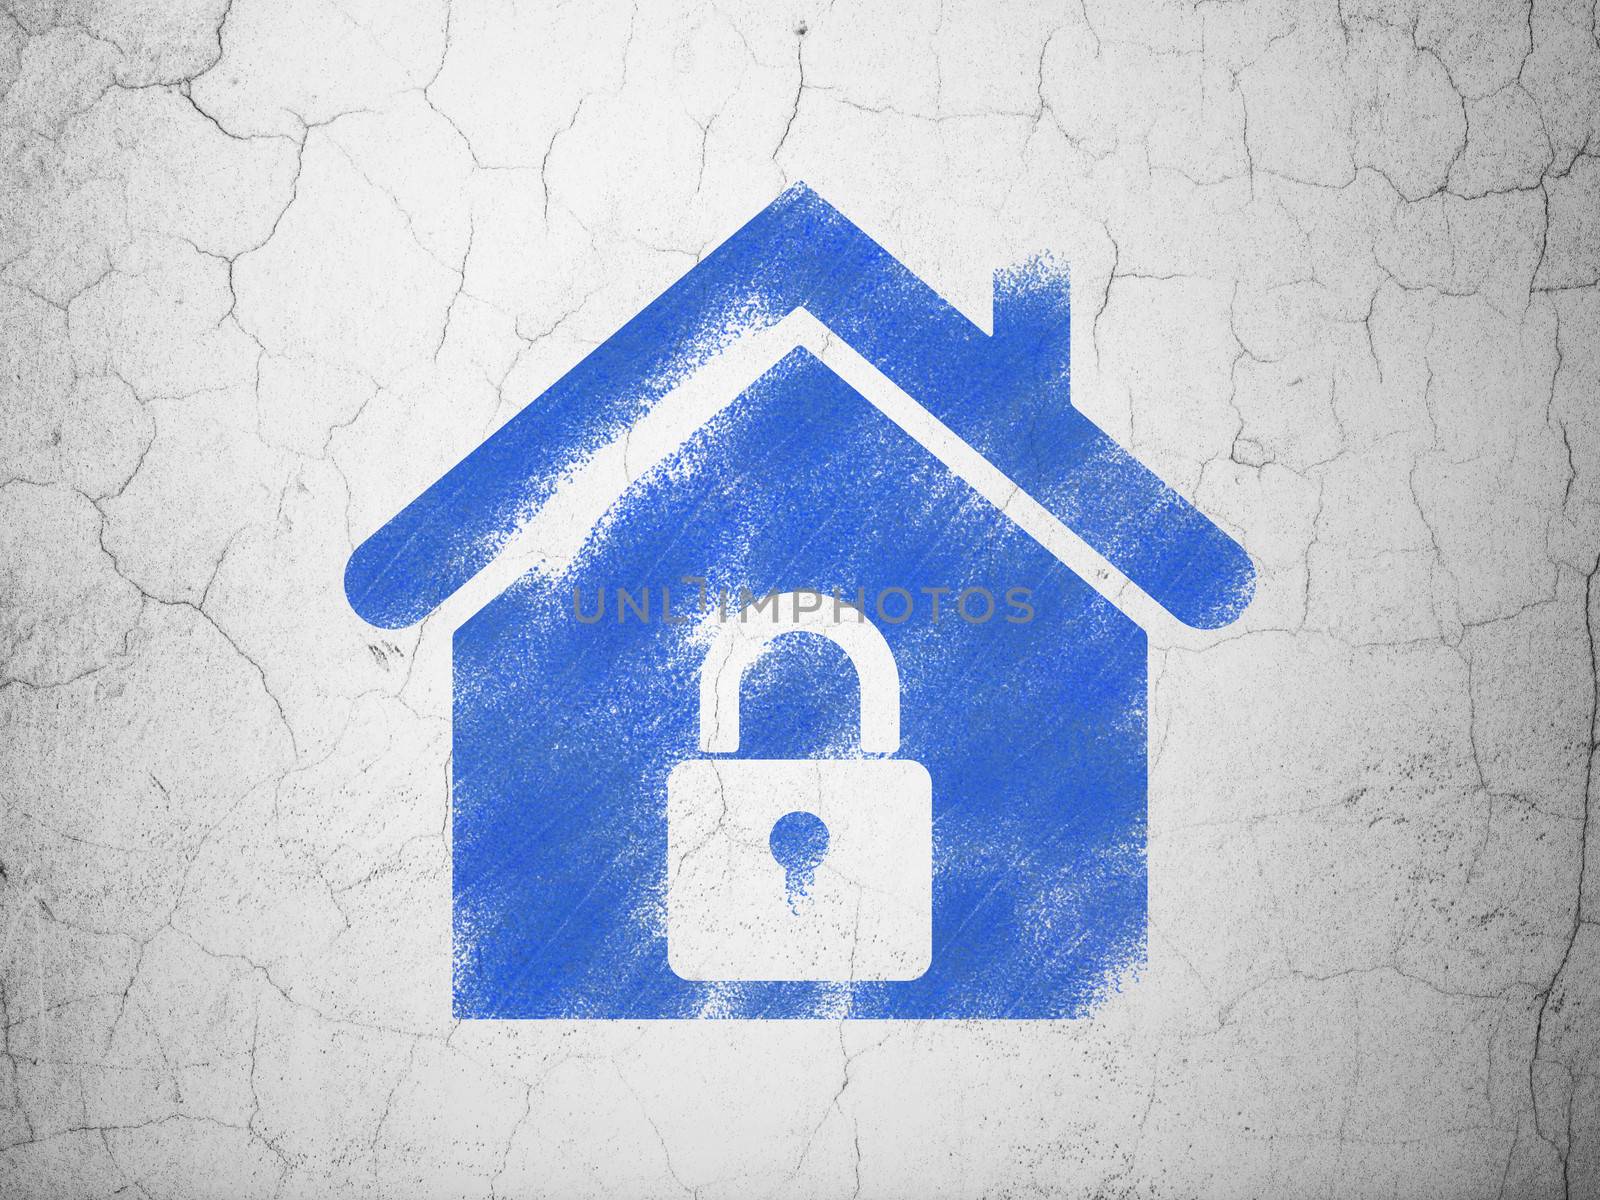 Security concept: Blue Home on textured concrete wall background, 3d render